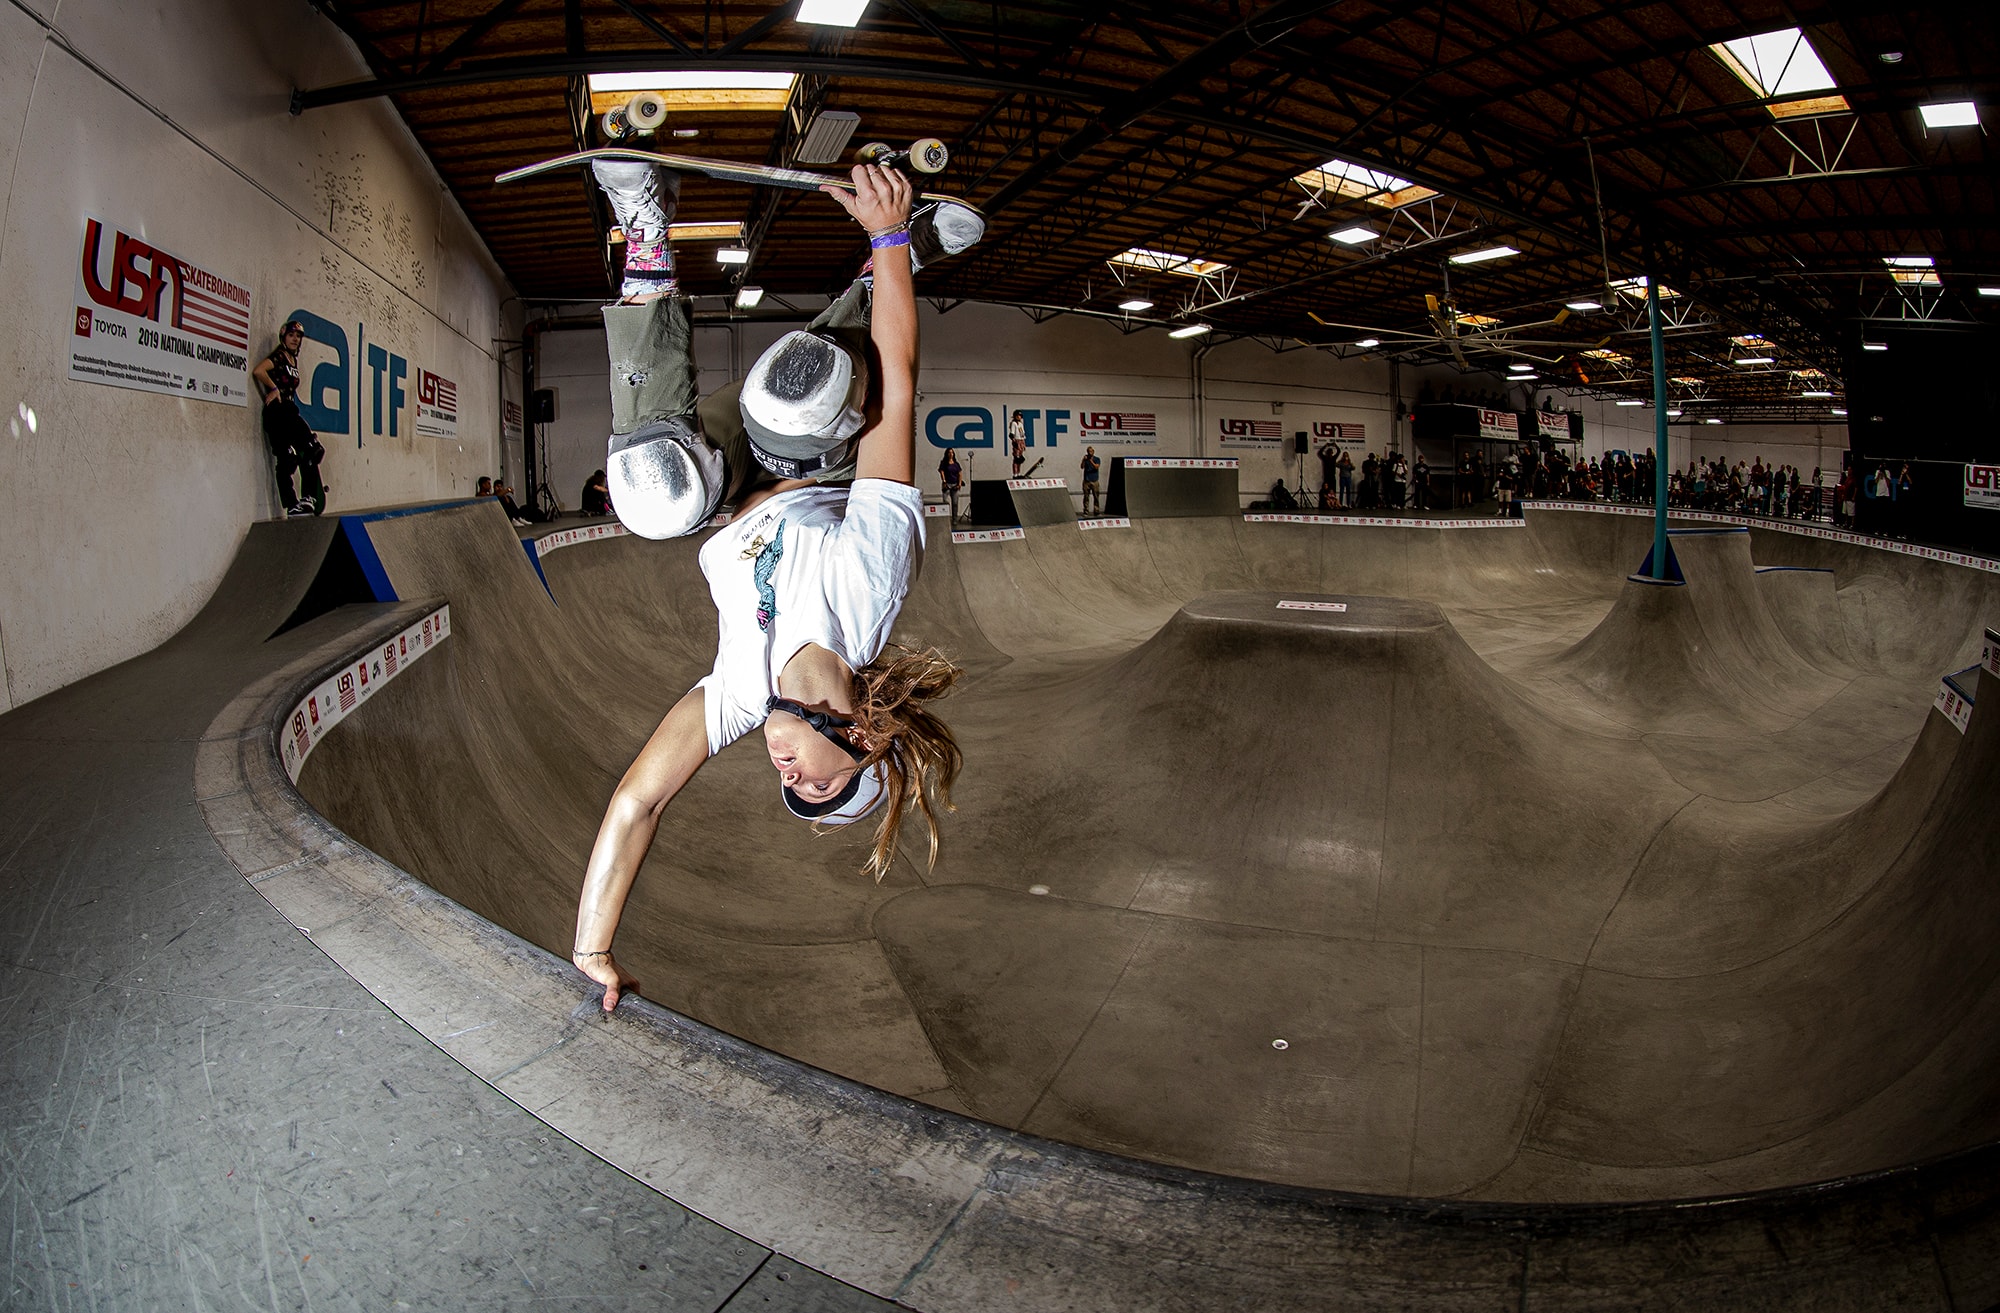 U.S.A. Skateboarding National Championships: Photography By Dave Swift